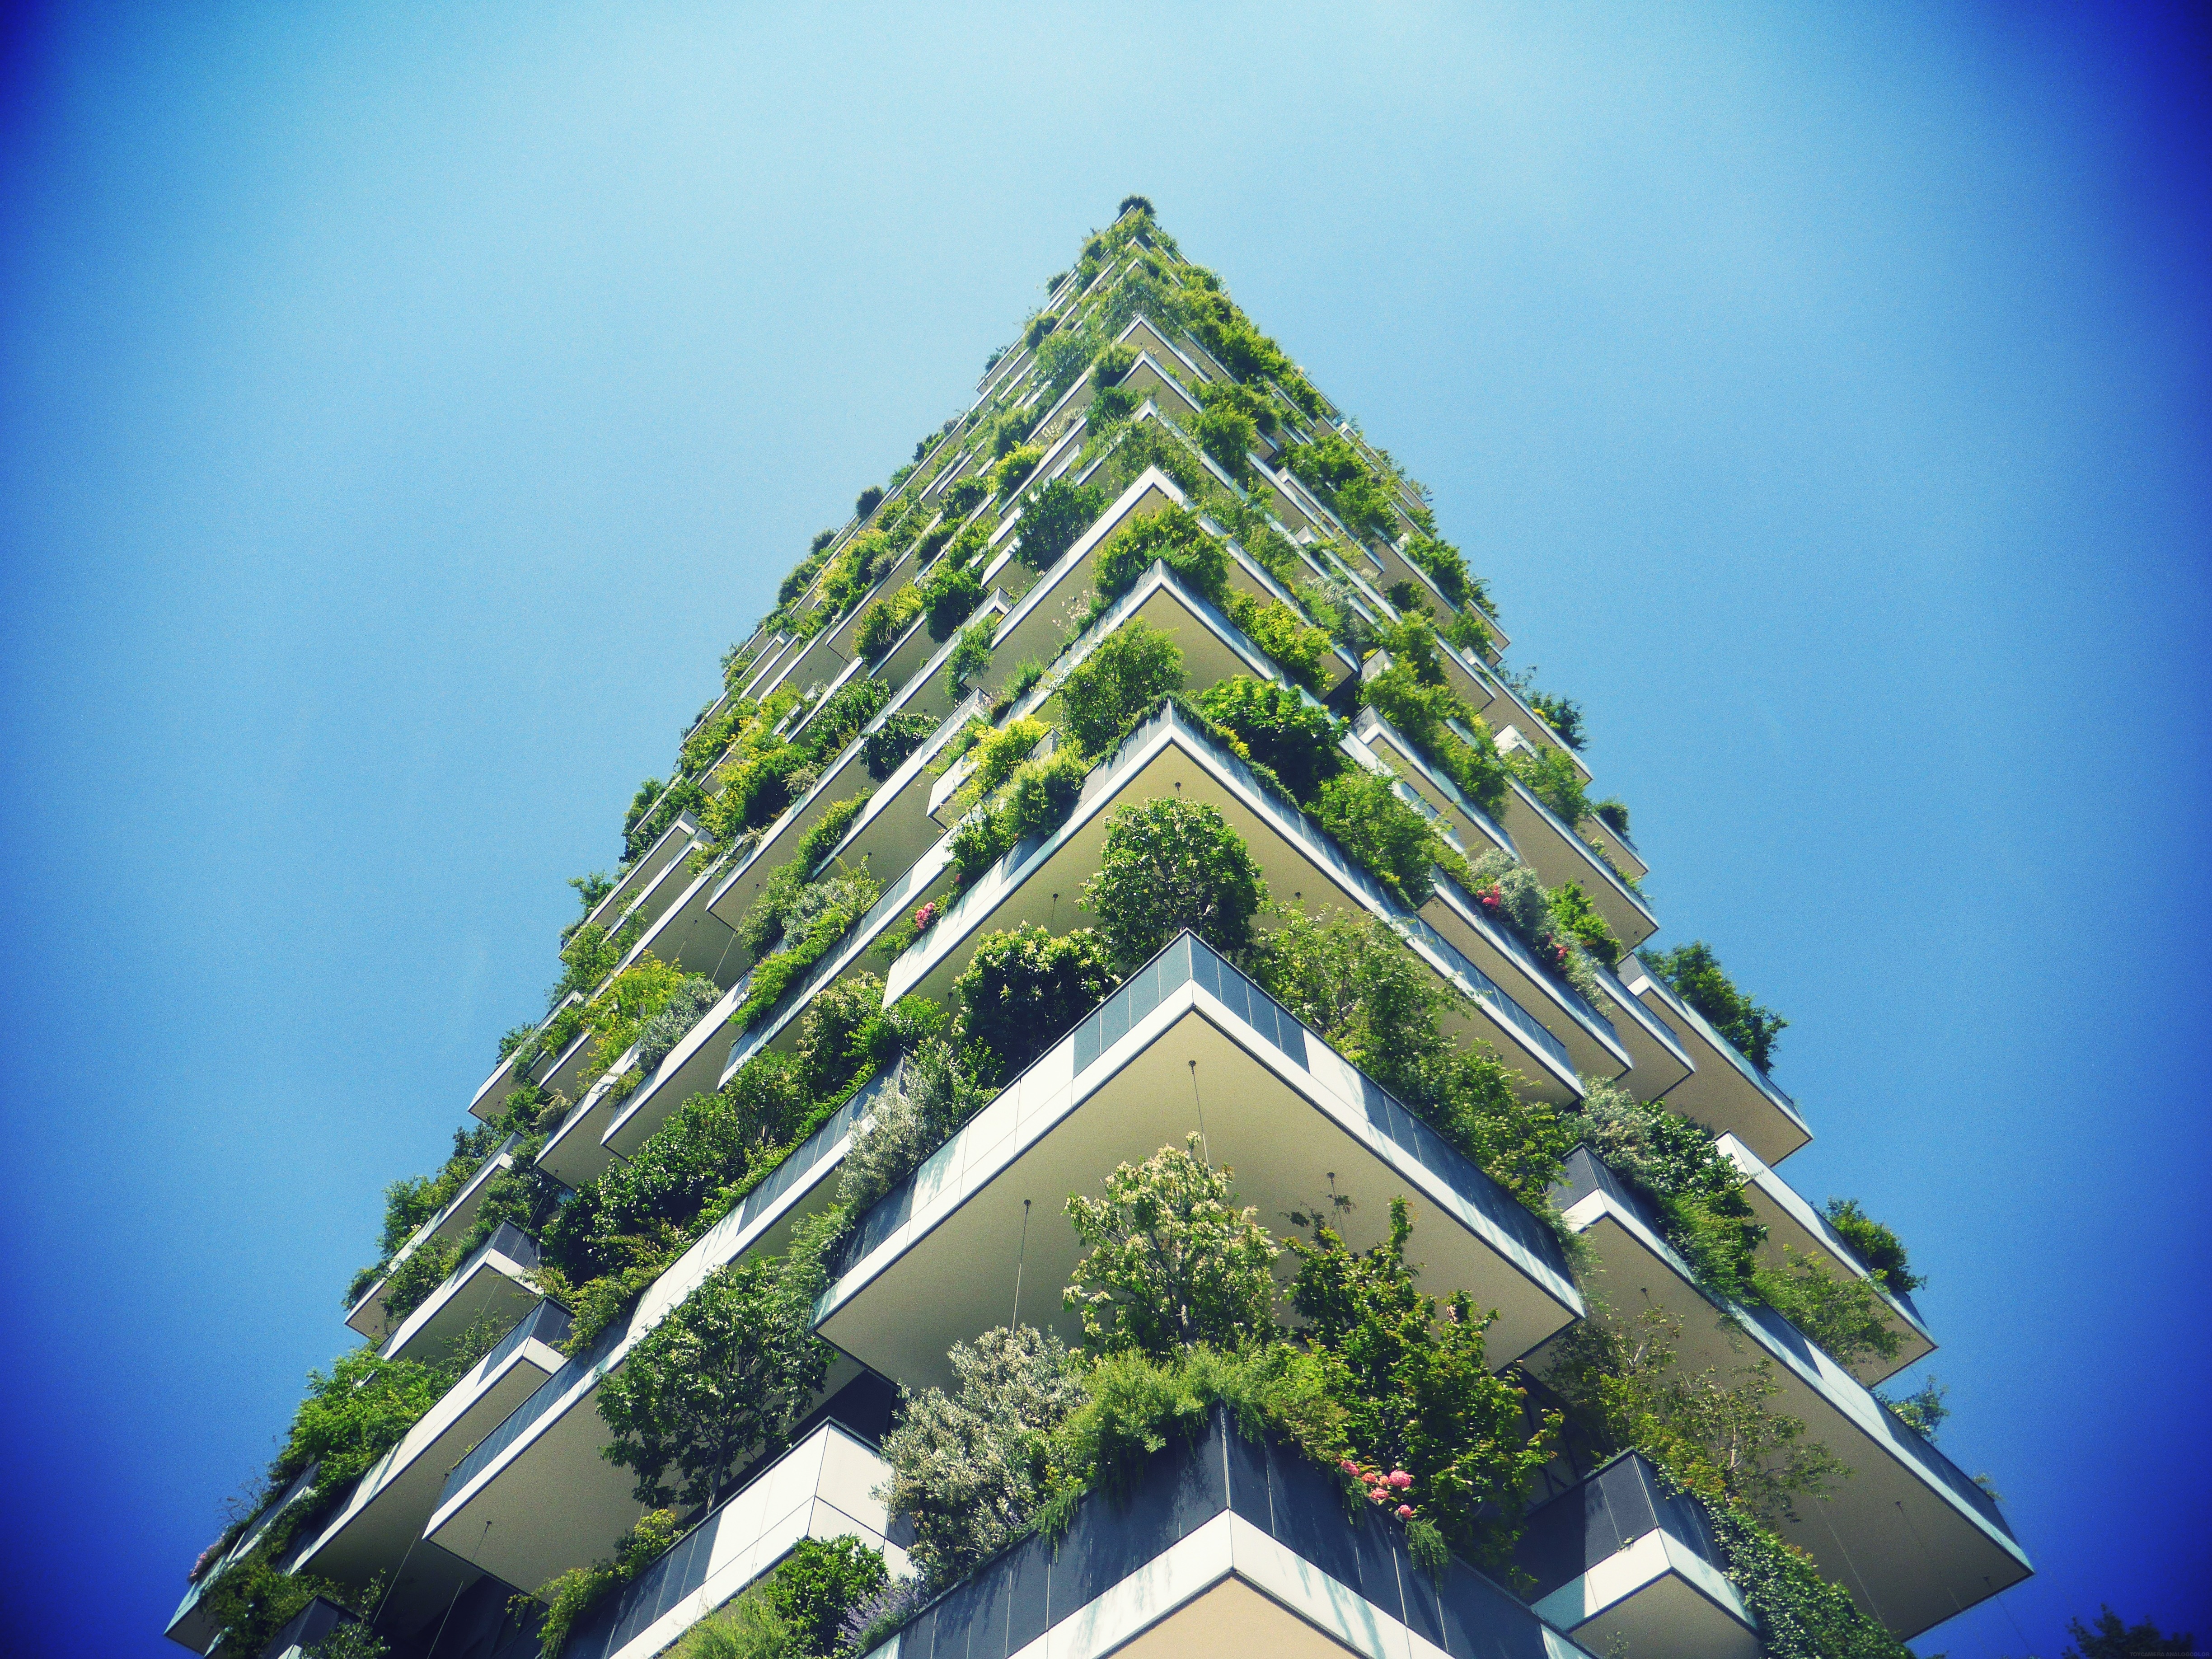 Tree-covered skyscraper is world's best tall building - Business Insider